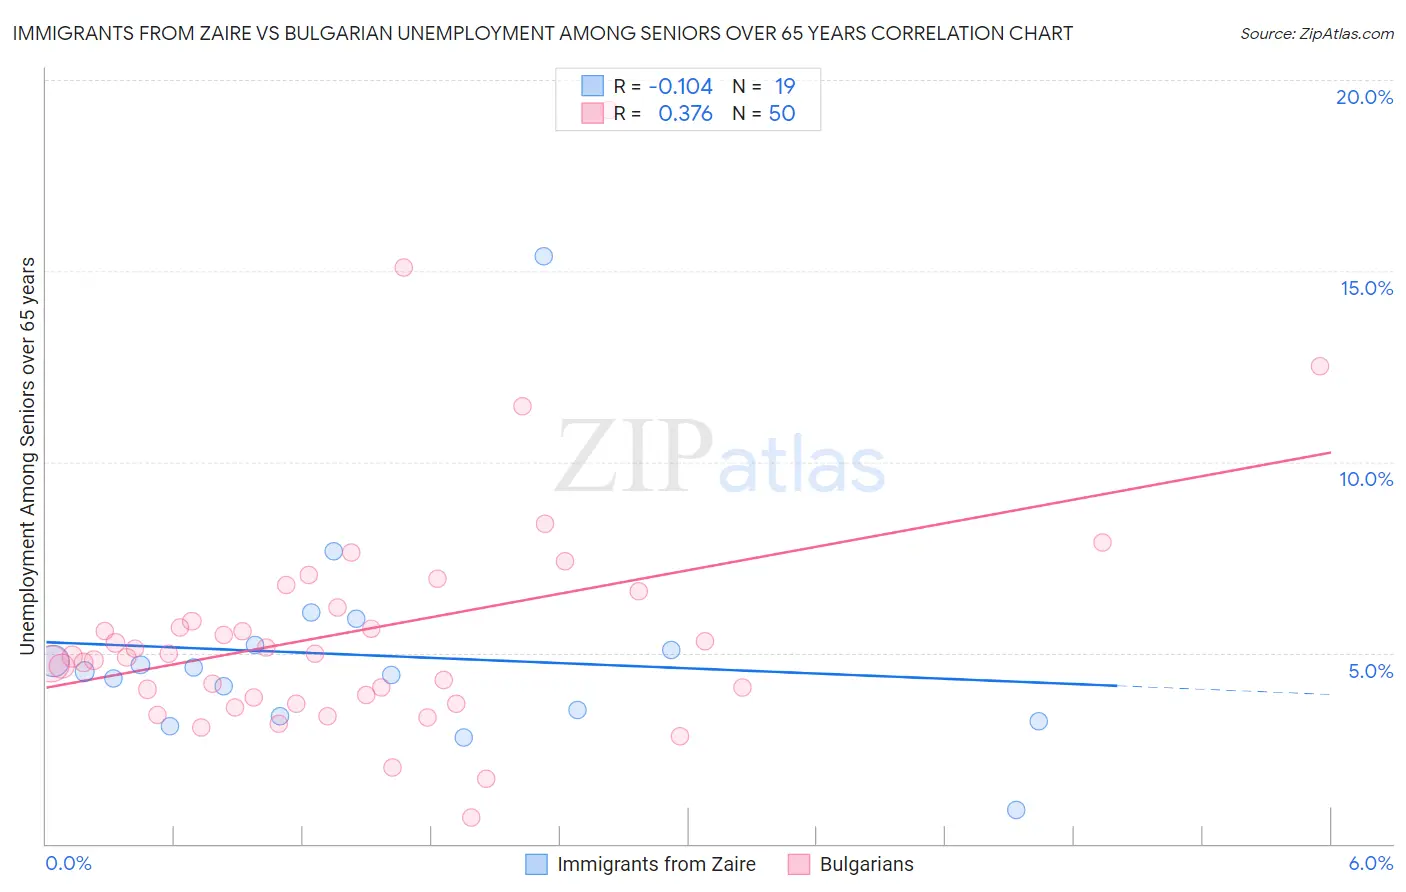 Immigrants from Zaire vs Bulgarian Unemployment Among Seniors over 65 years